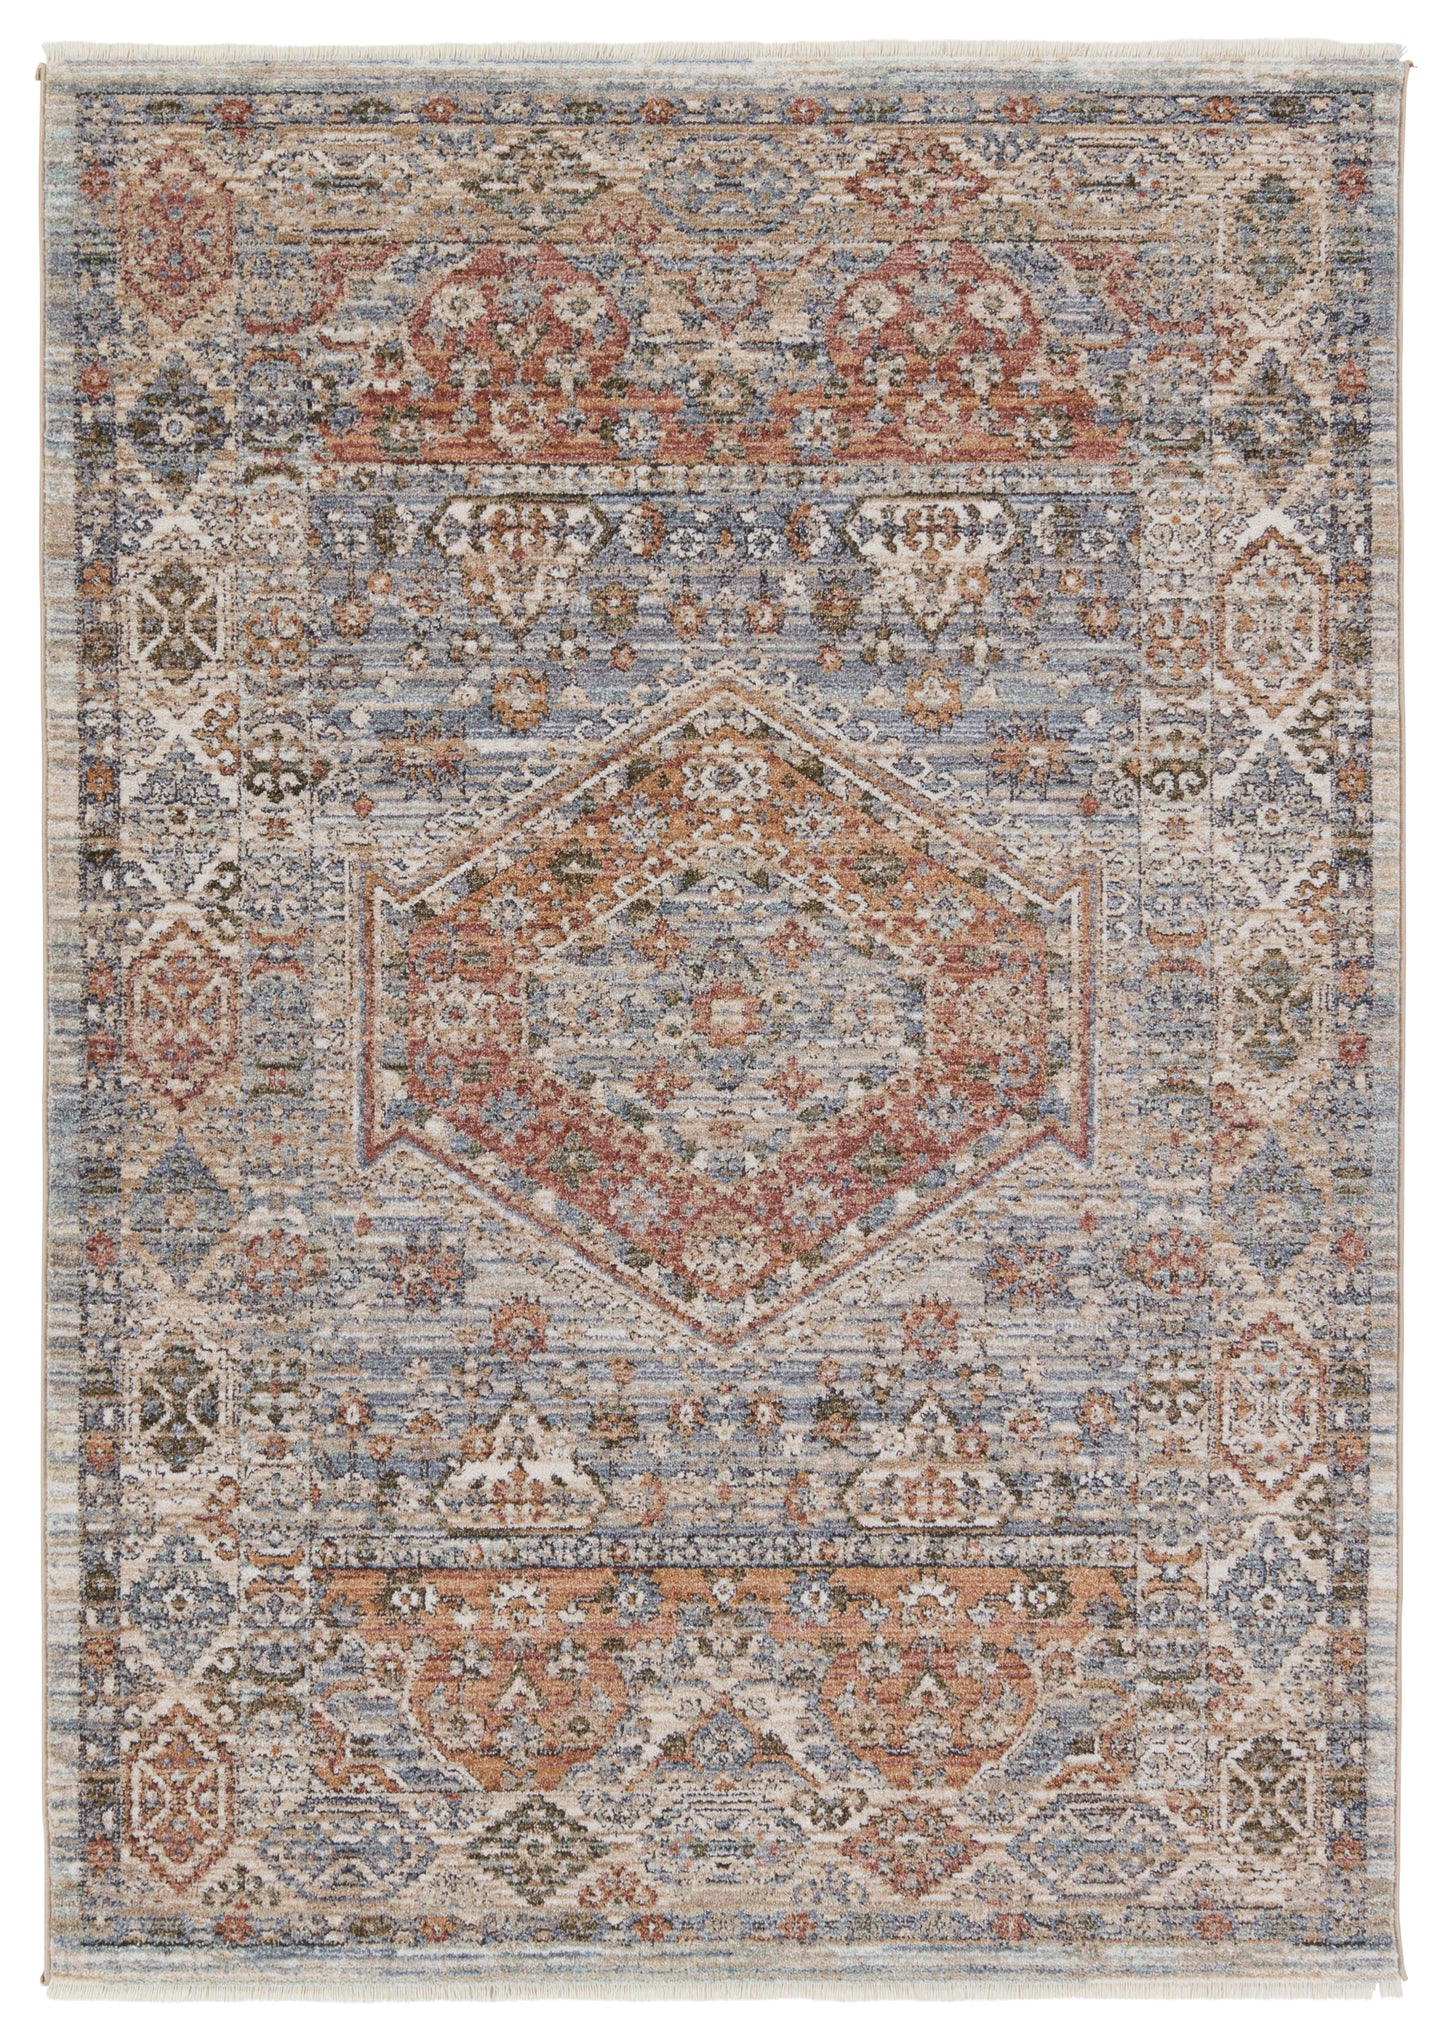 Lark Madrid Machine Made Synthetic Blend Indoor Area Rug From Jaipur Living